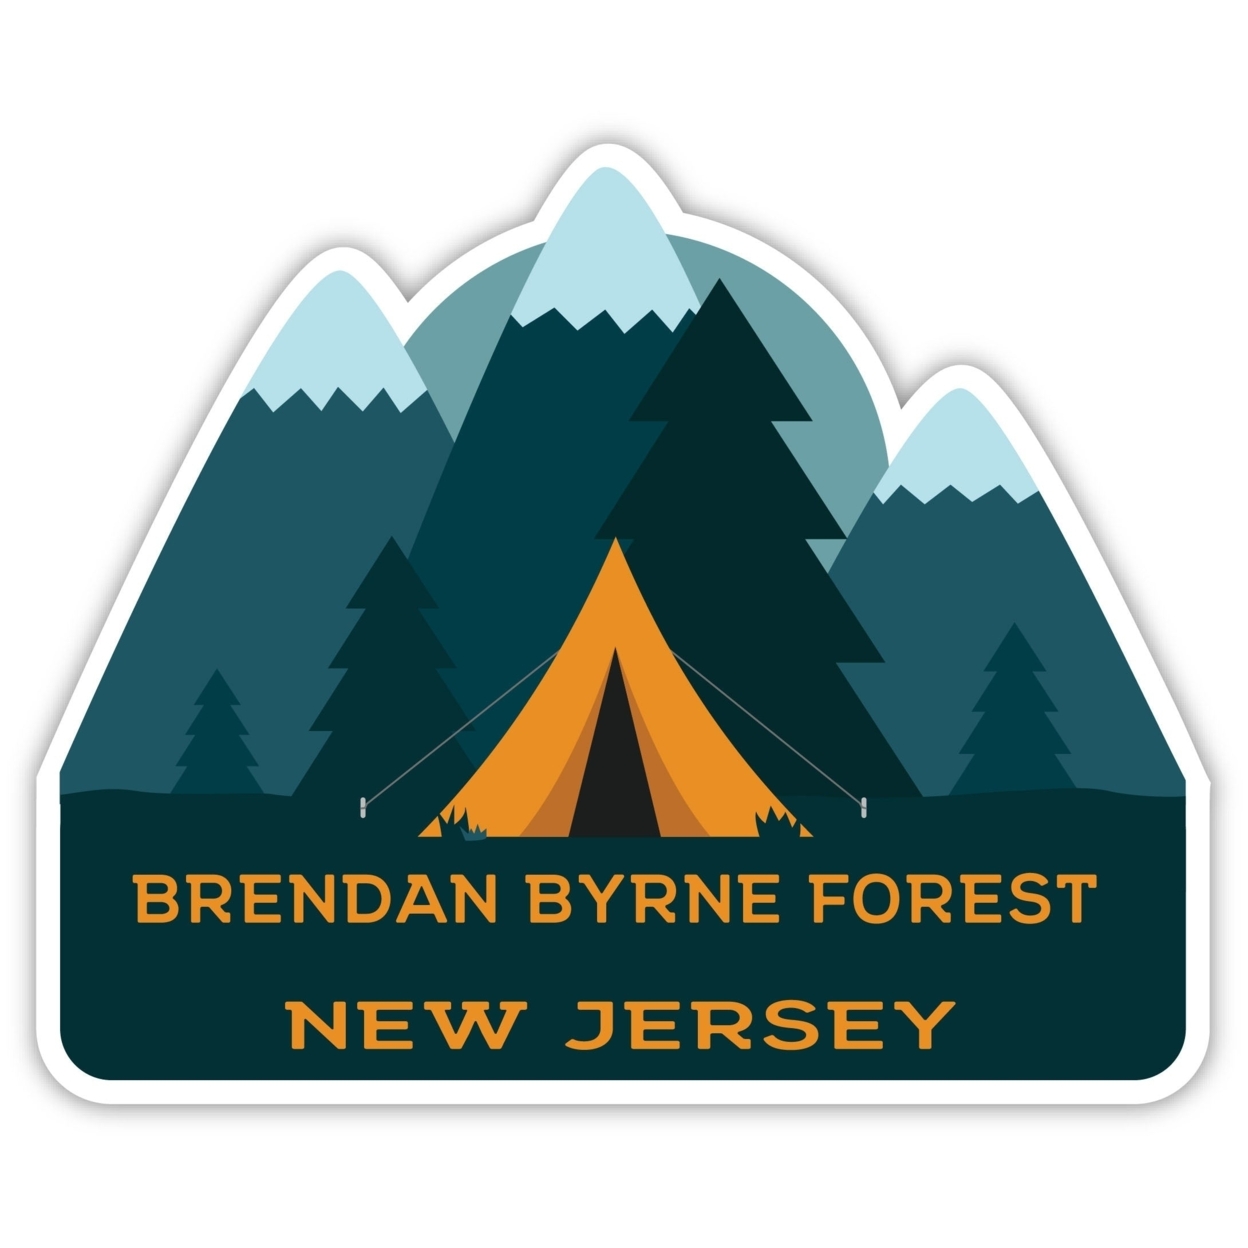 Brendan Byrne Forest New Jersey Souvenir Decorative Stickers (Choose Theme And Size) - Single Unit, 10-Inch, Tent